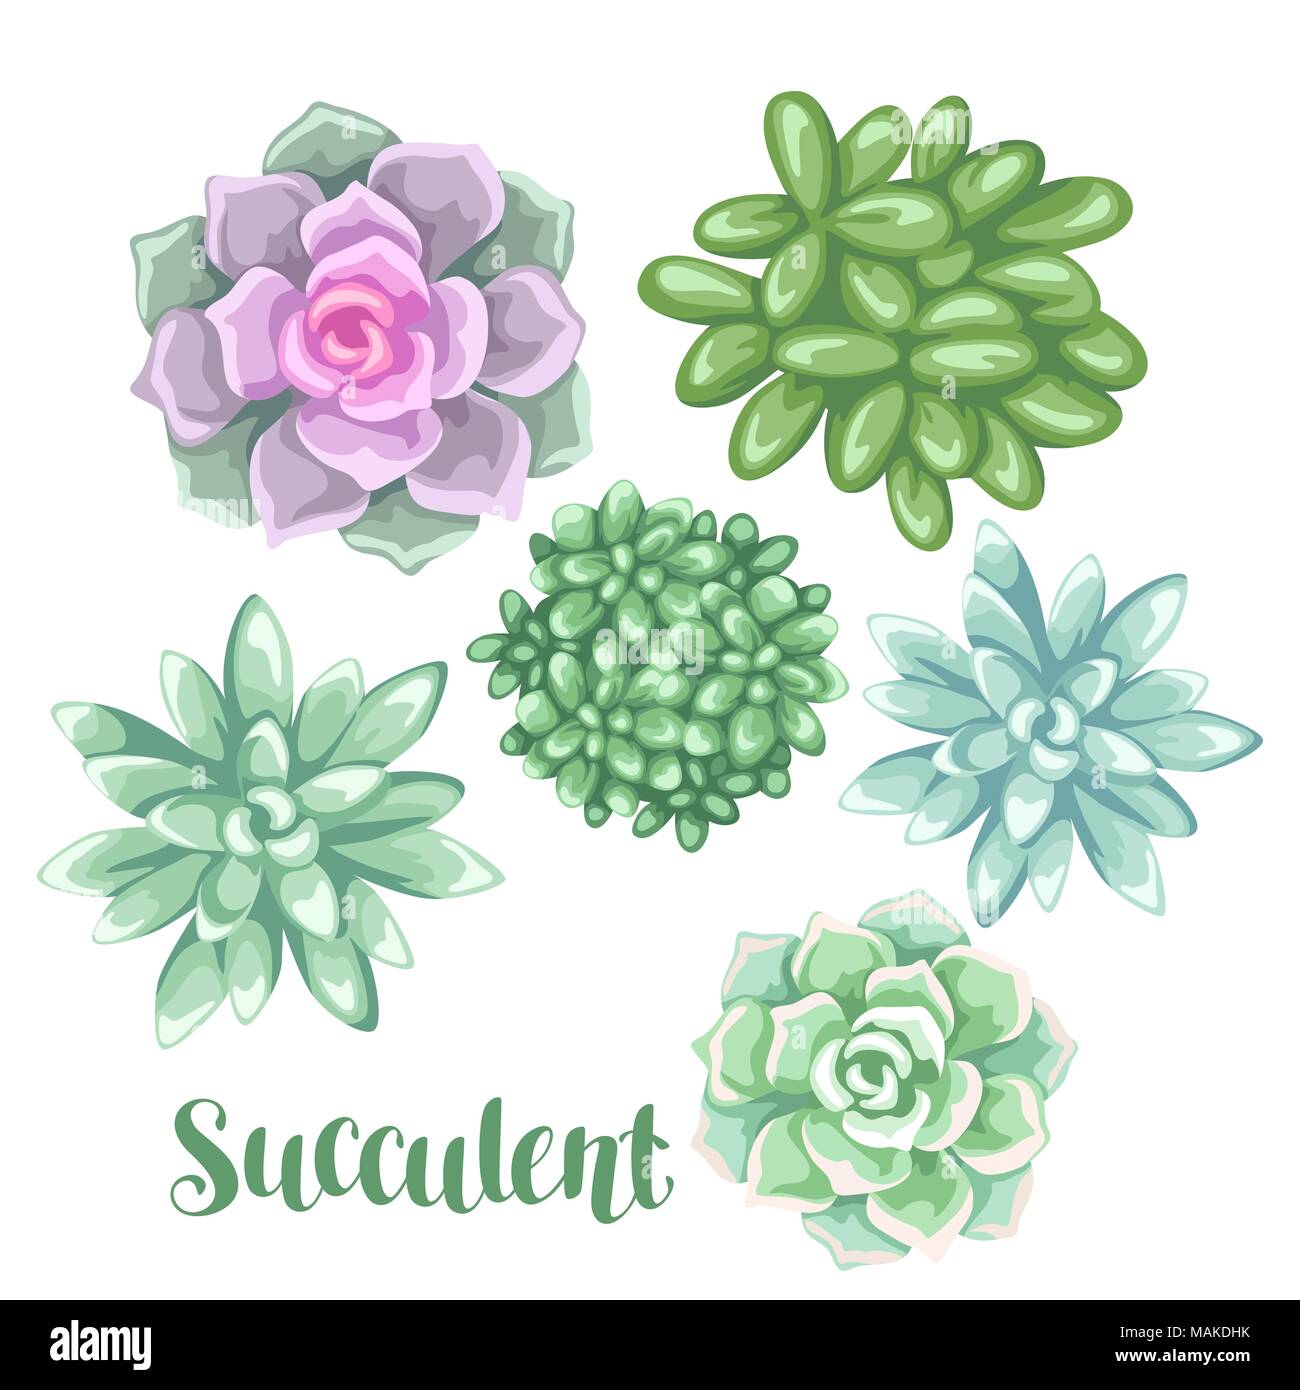 Set of succulents. Echeveria, Jade Plant and Donkey Tails Stock Vector